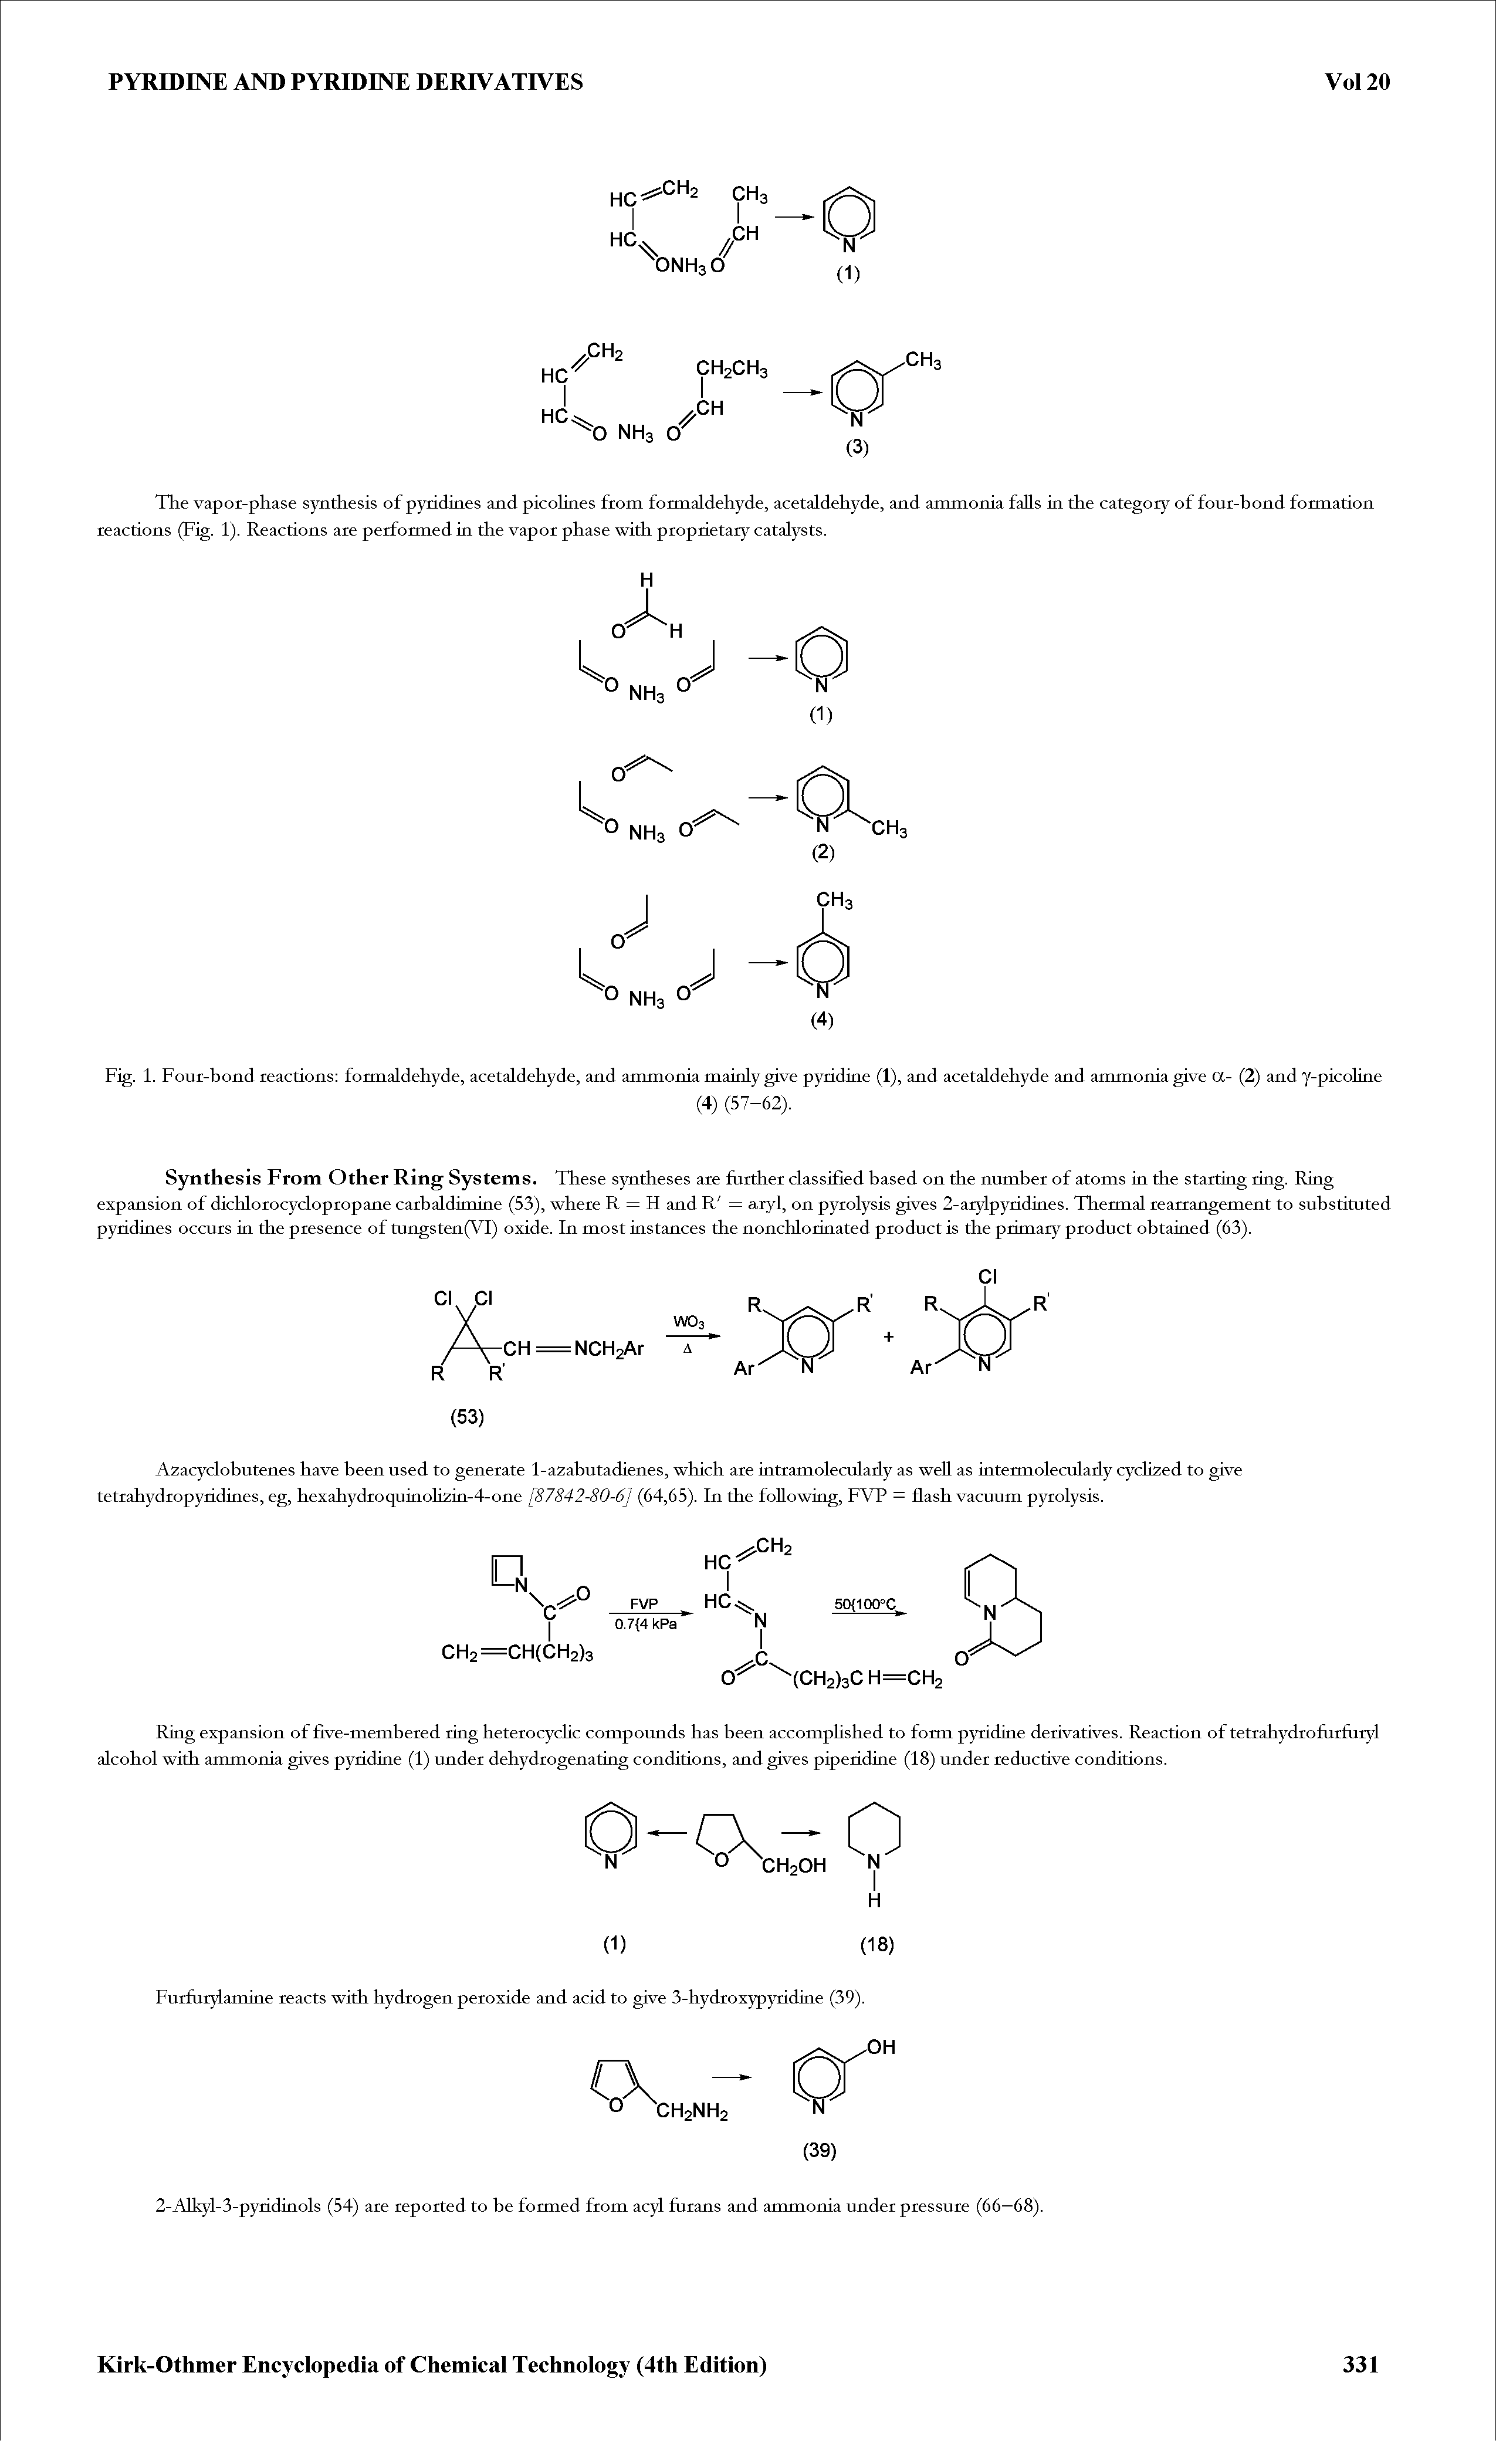 Fig. 1. Four-bond reactions formaldehyde, acetaldehyde, and ammonia mainly give pyridine (1), and acetaldehyde and ammonia give a- (2) and y-picoline...